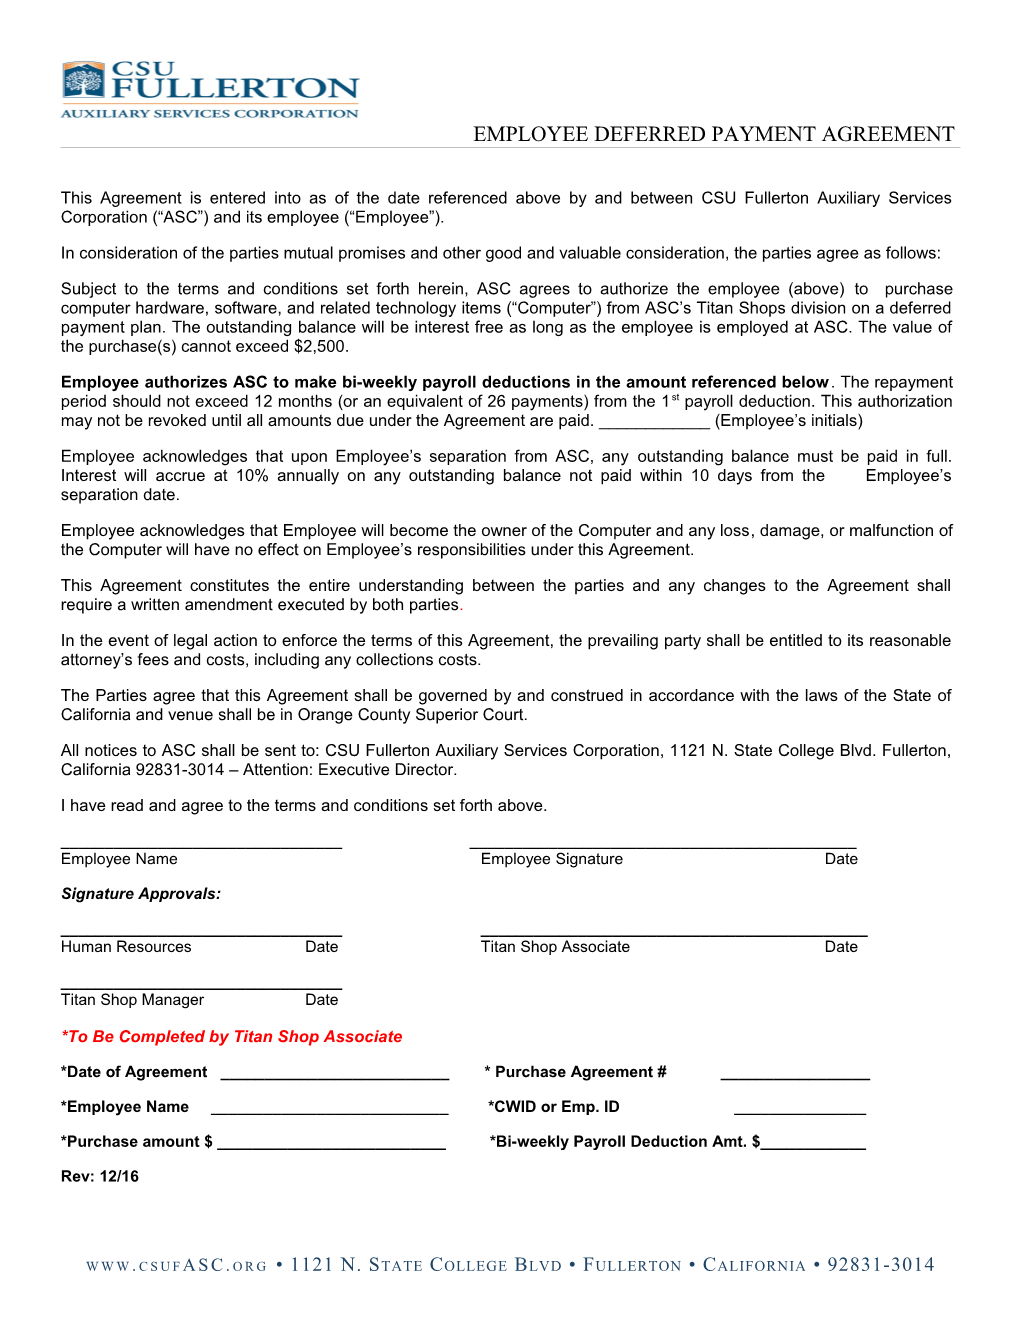 Employee Deferred Payment Agreement